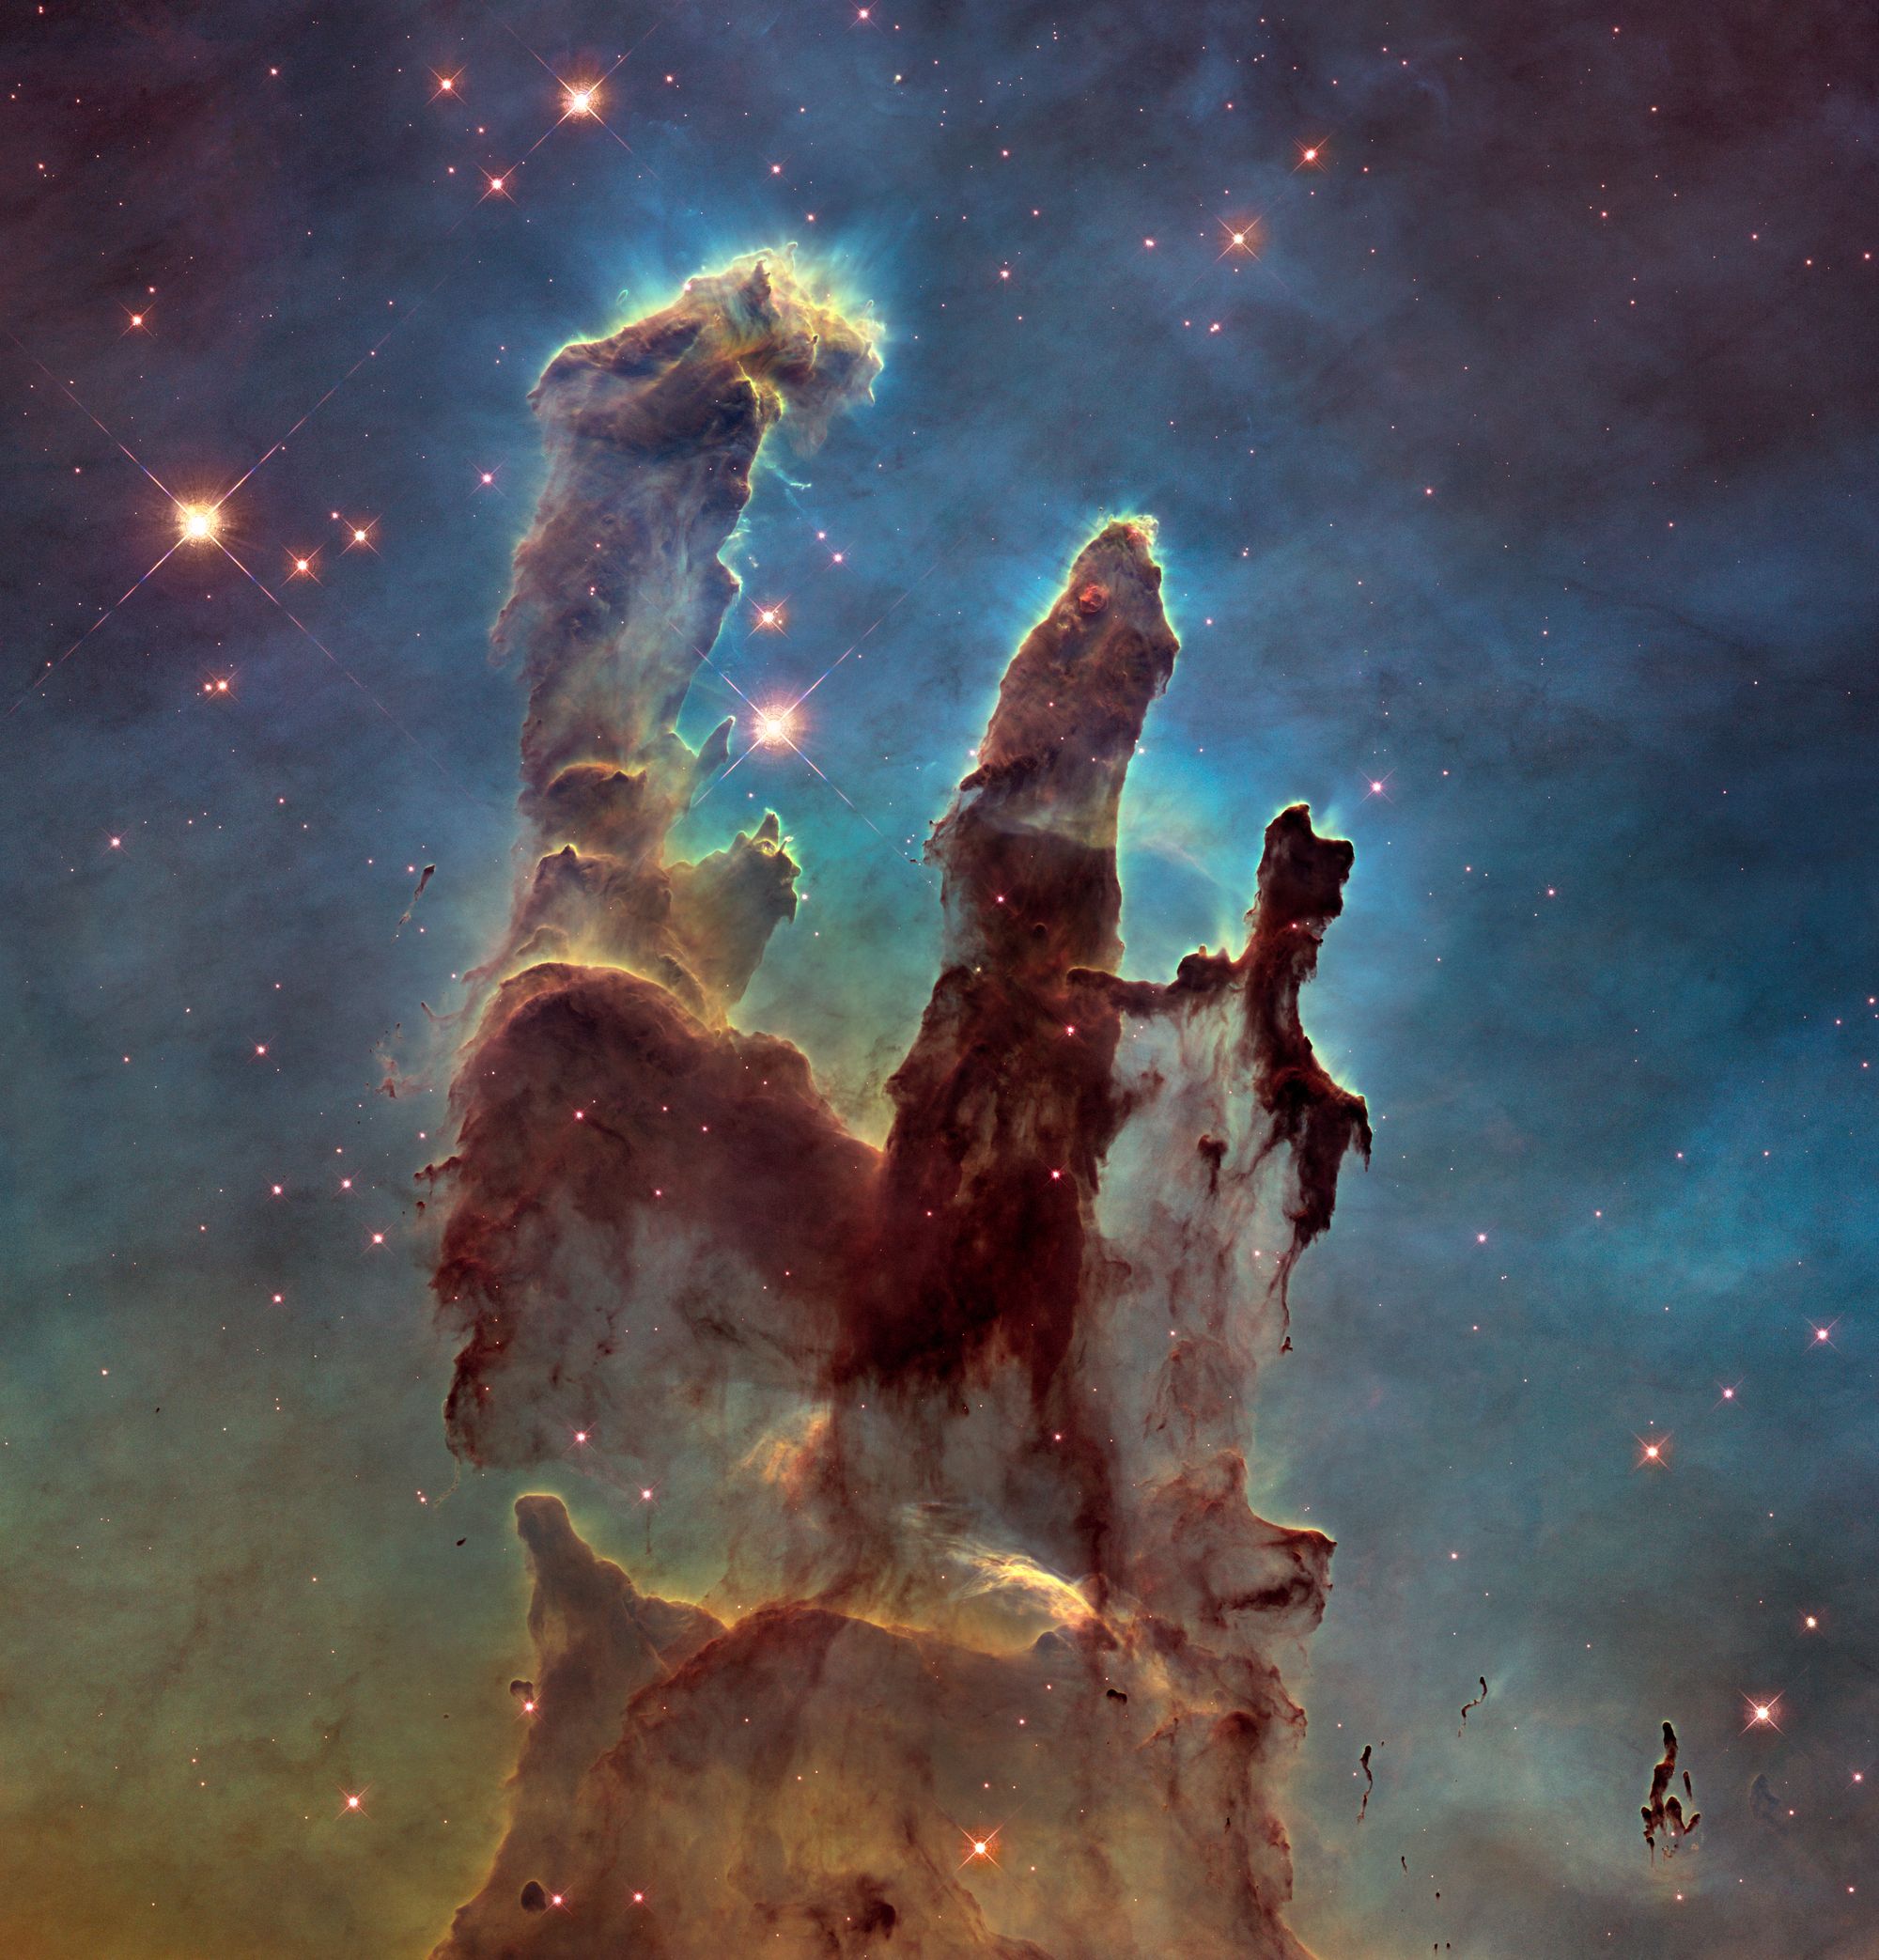 Pillars of Creation by the Hubble Space Telescope